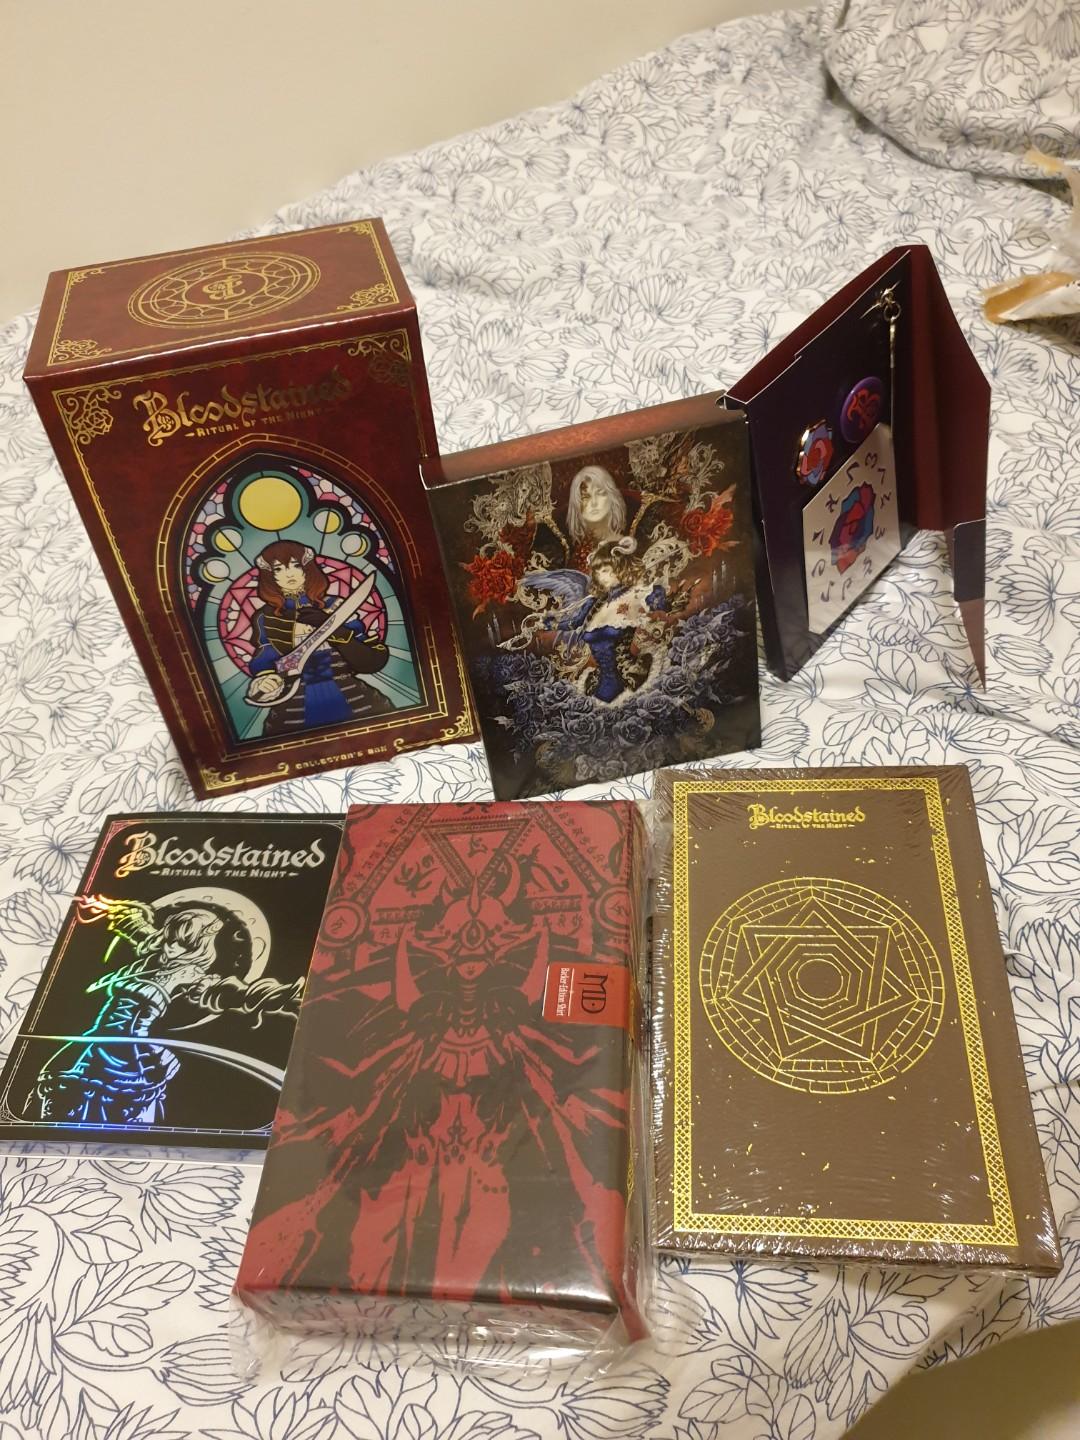 Bloodstained: Collector's Box Kickstarter limited (new)